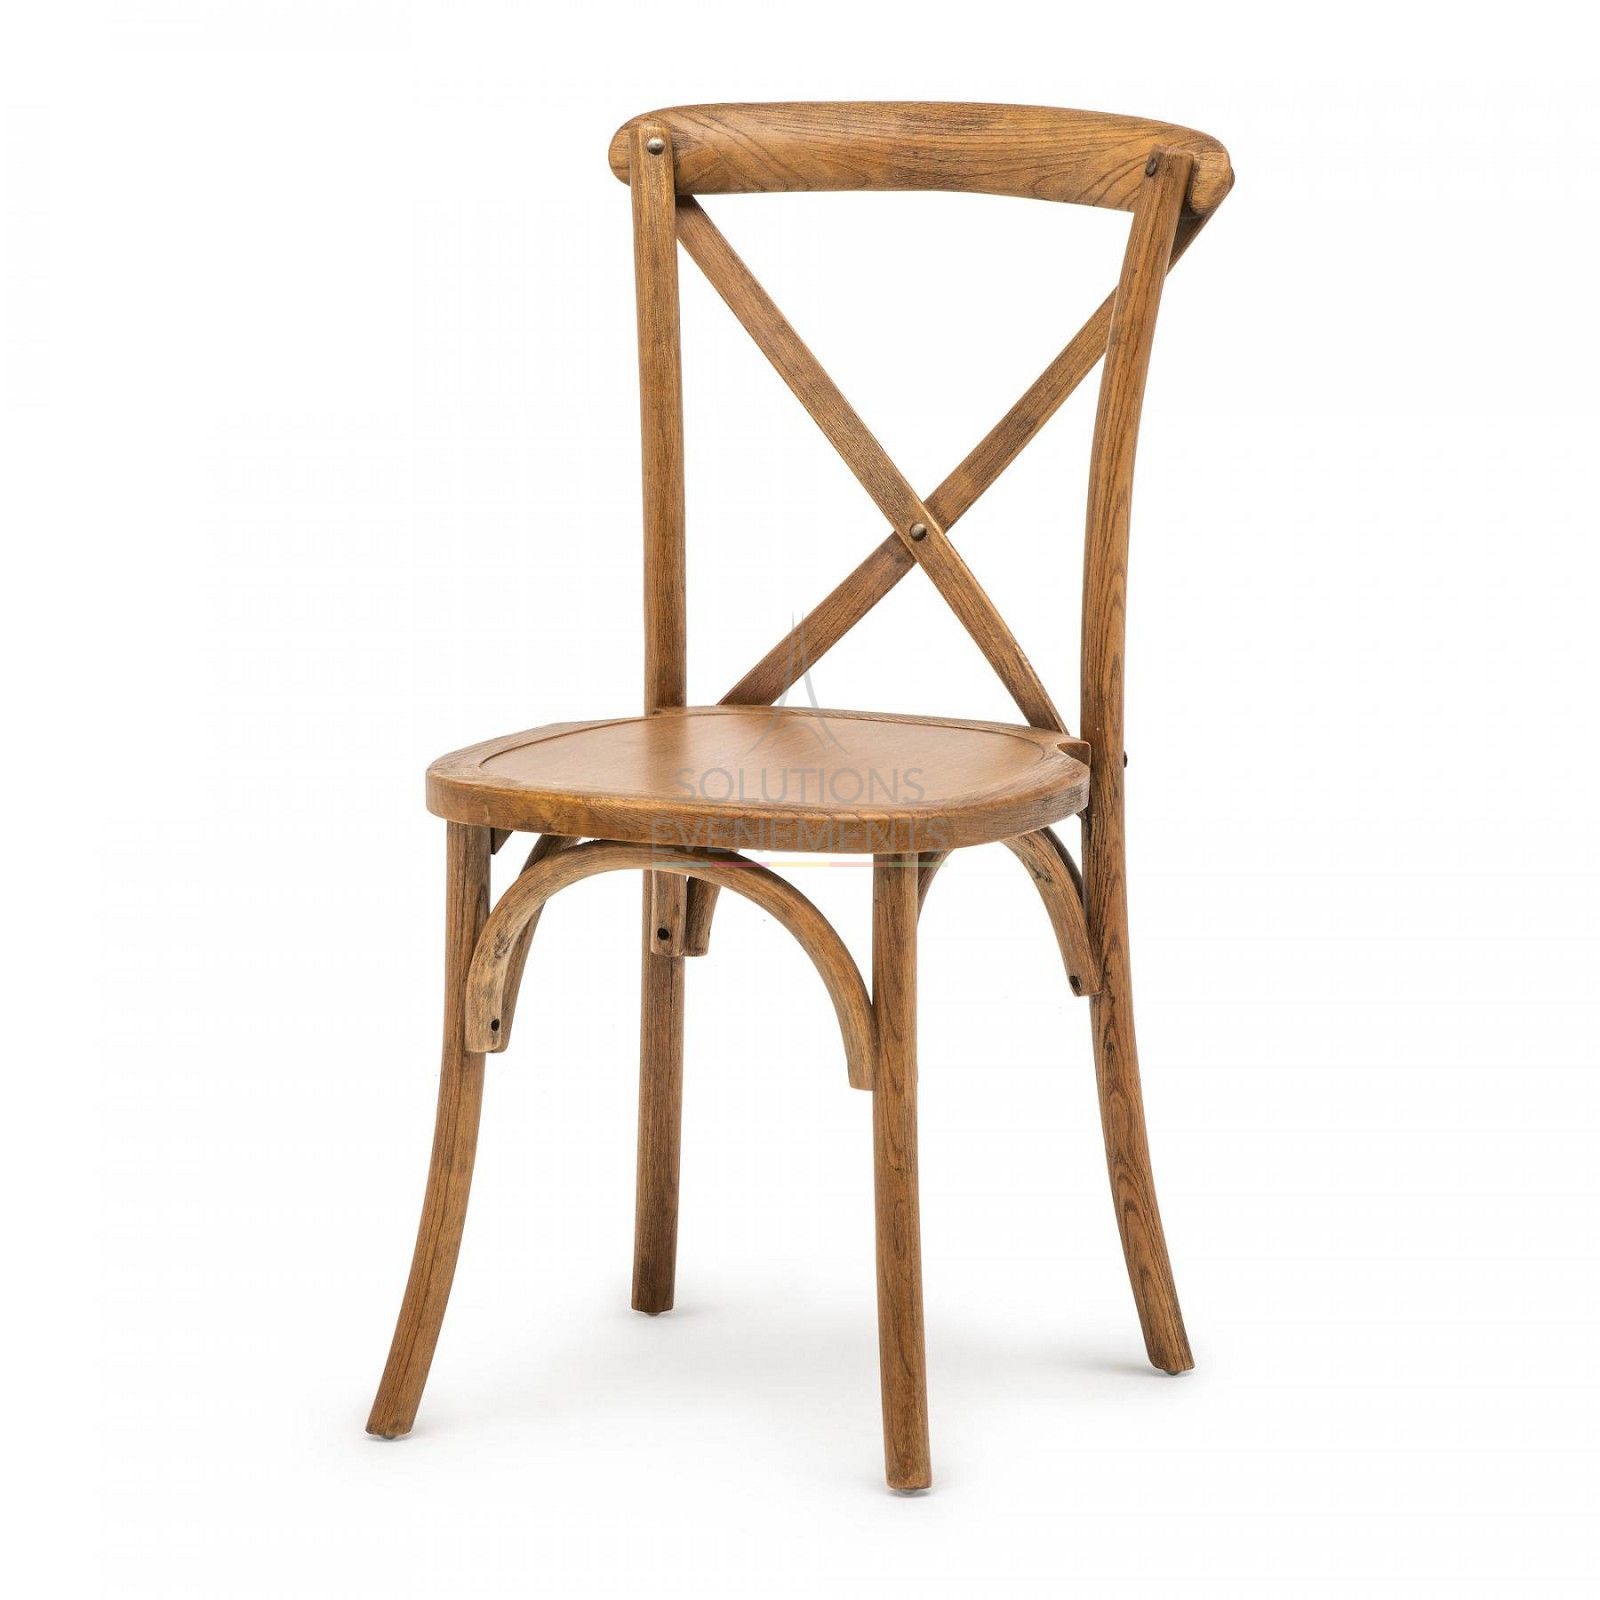 Rental quality chair with wooden cross back.